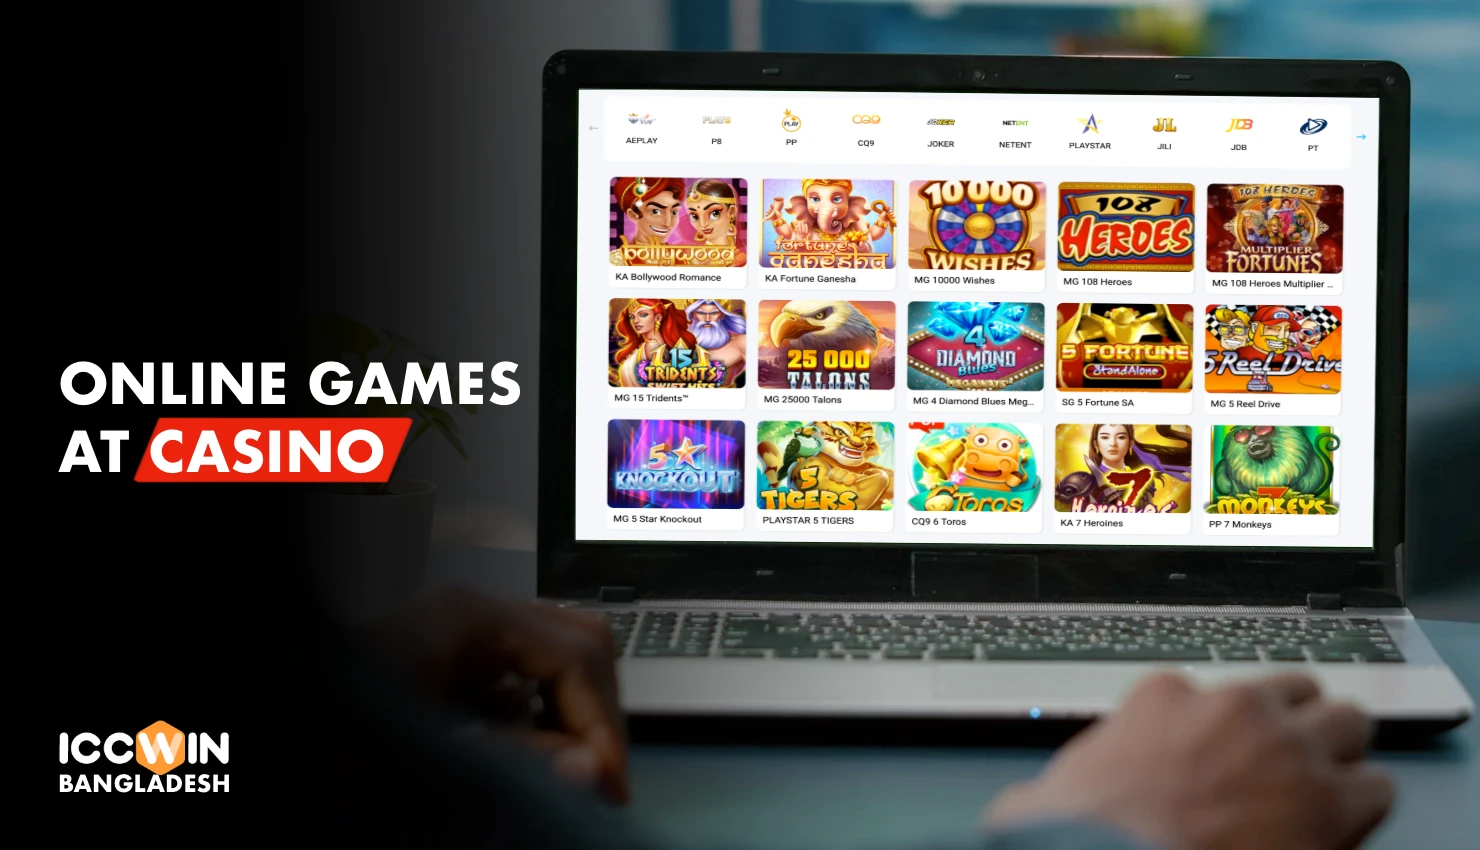 At Iccwin Casino you will find many different license online games by the best software providers